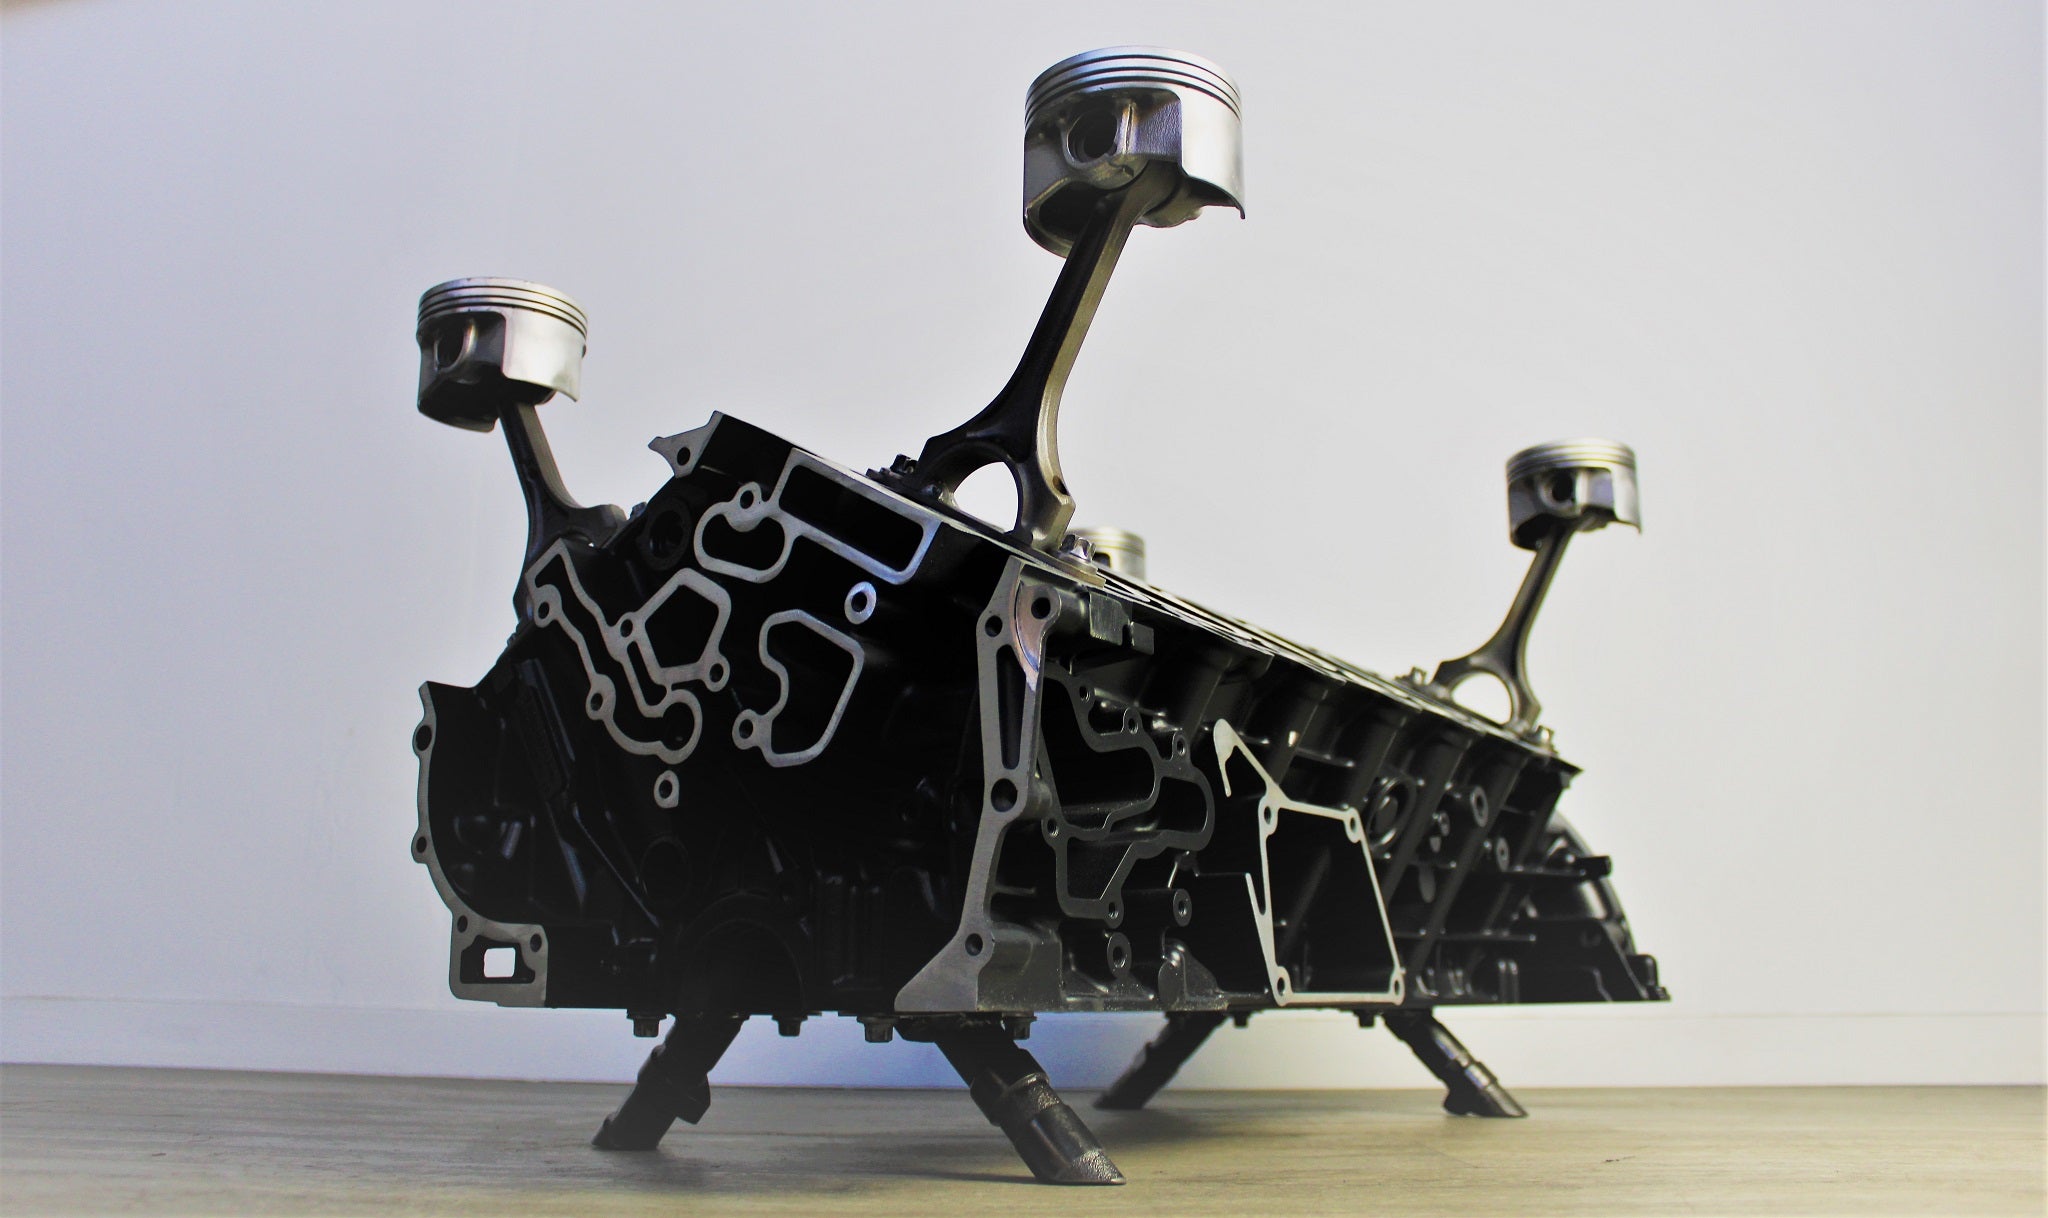 Mercedes V12 engine block coffee table finished in black and silver without its glass top.